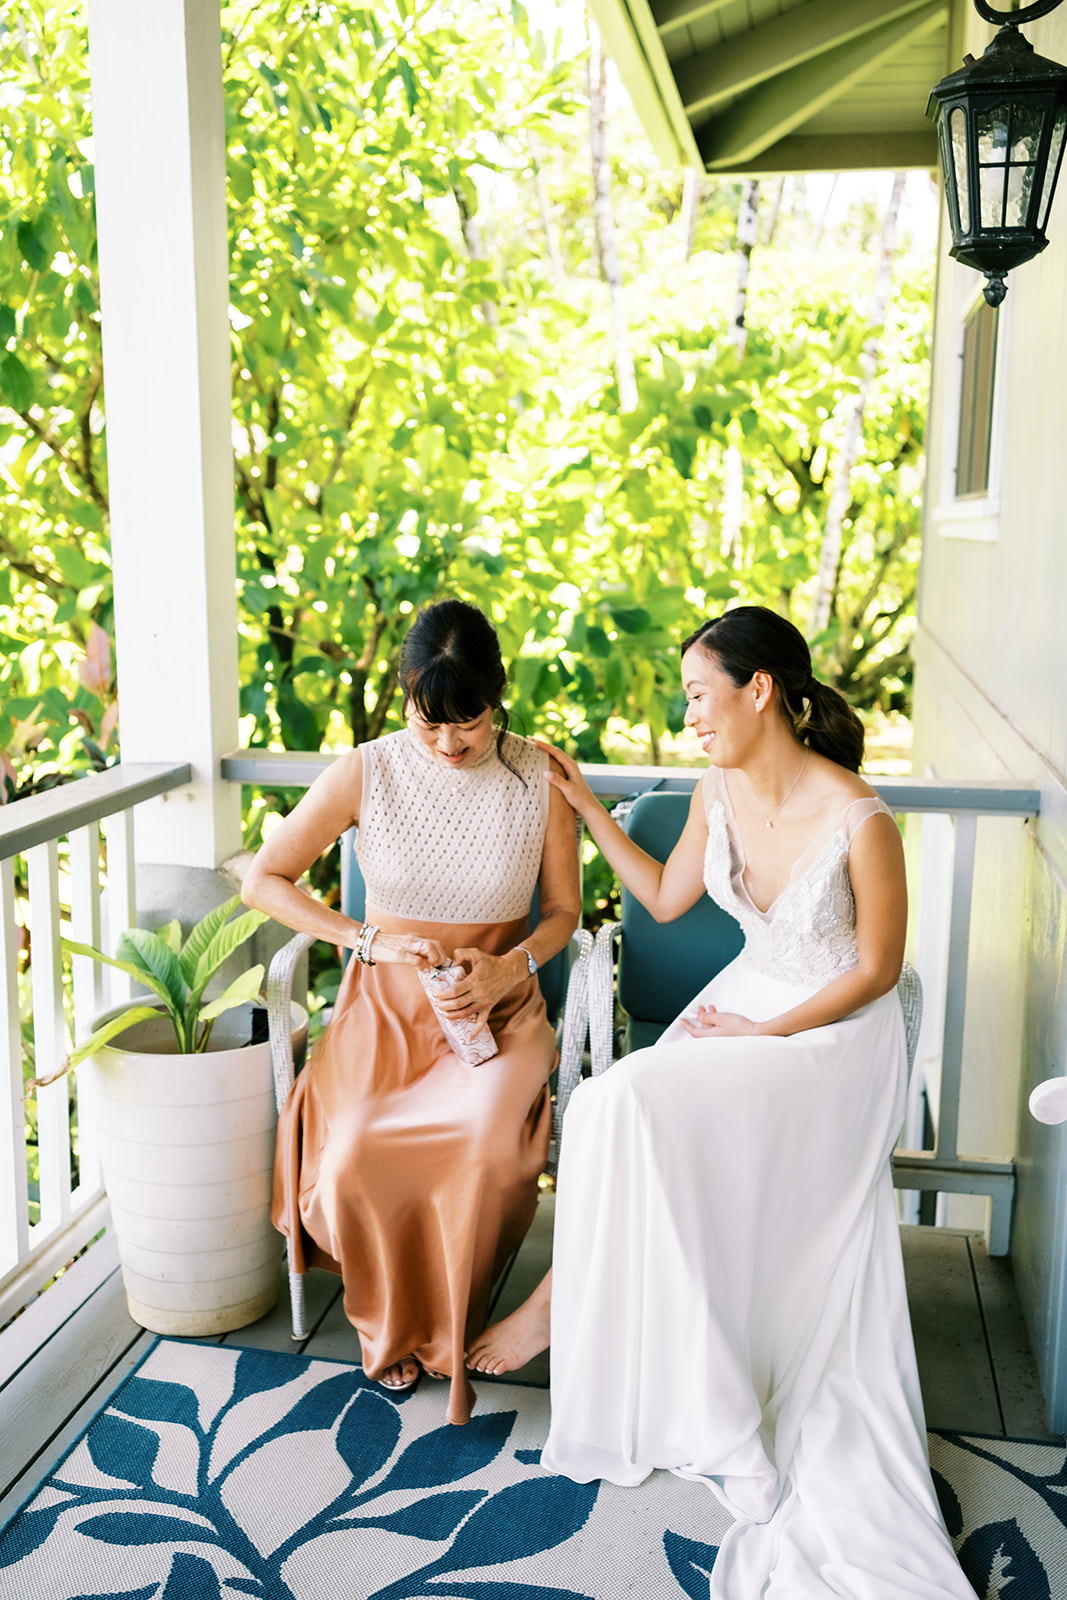 Two women sharing a joyful moment on a porch, one in a bridal gown and the other in a formal dress Wedding at Na ‘Āina K